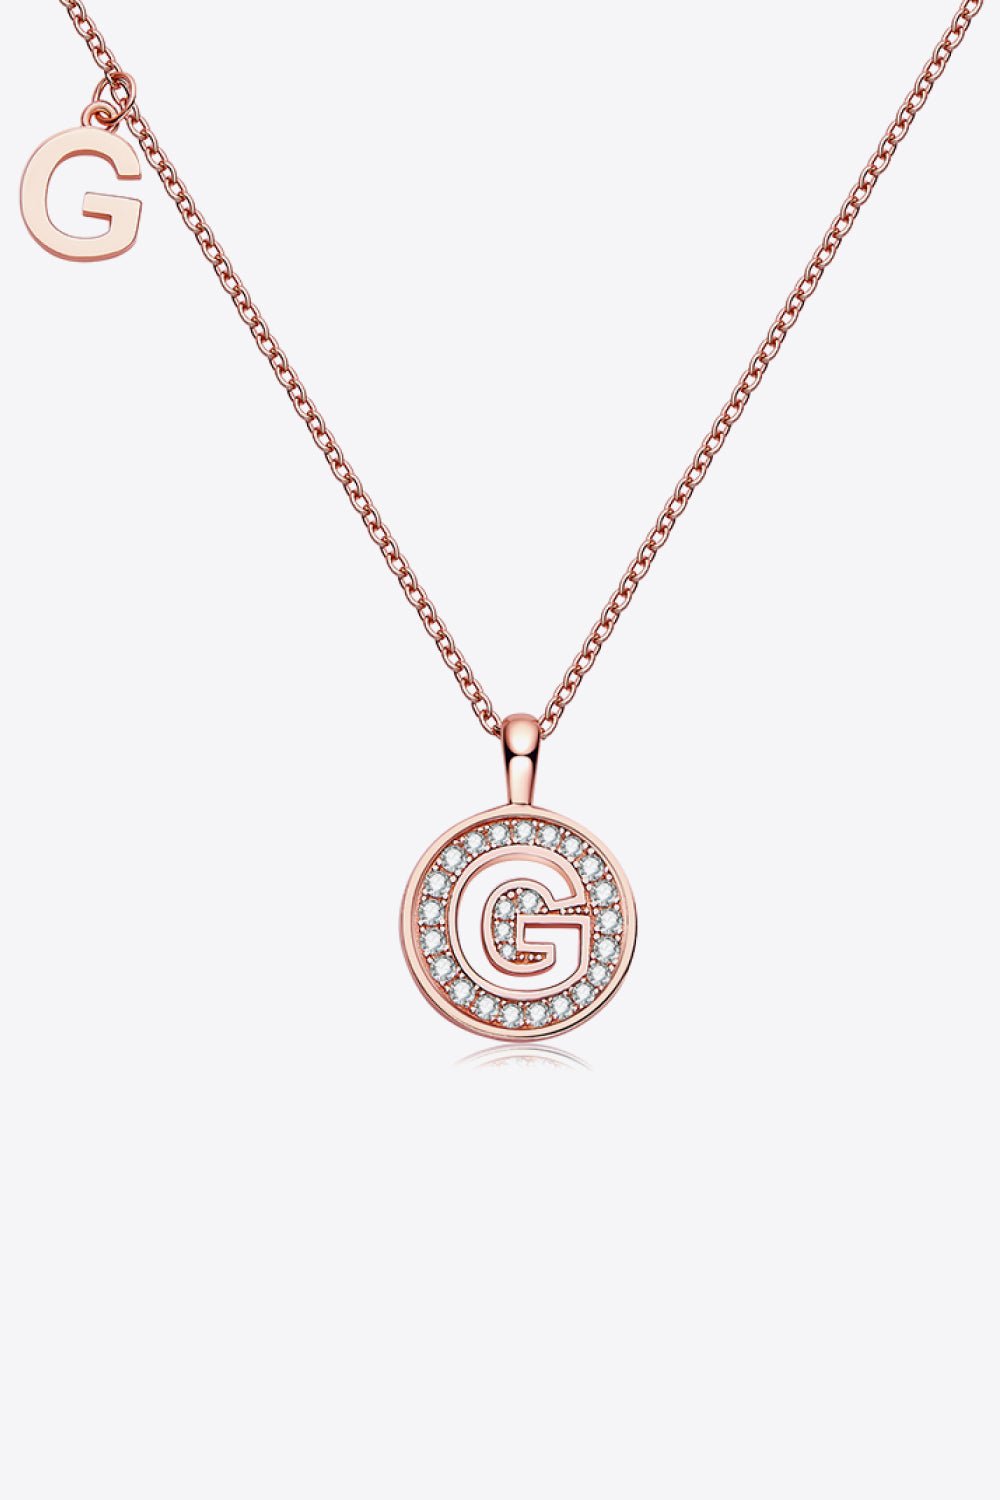 Moissanite A to J Pendant Necklace - Fashion Girl Online Store